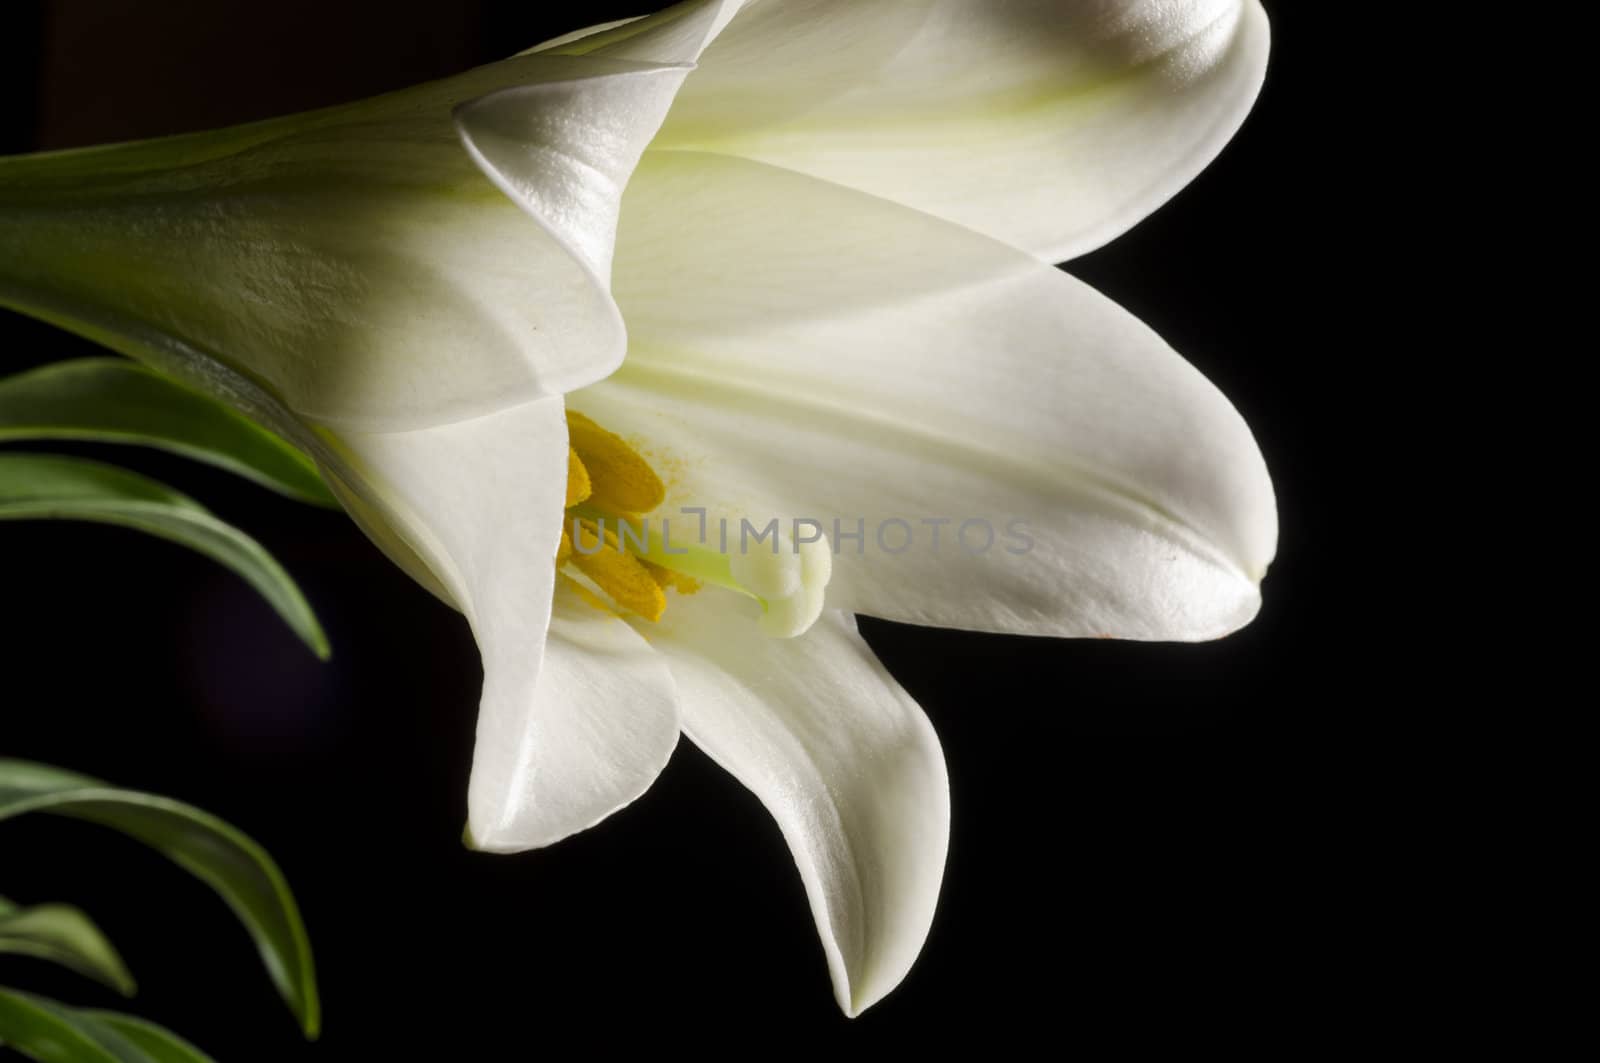 Selective focus on the pollen sacs of an Easter Lily